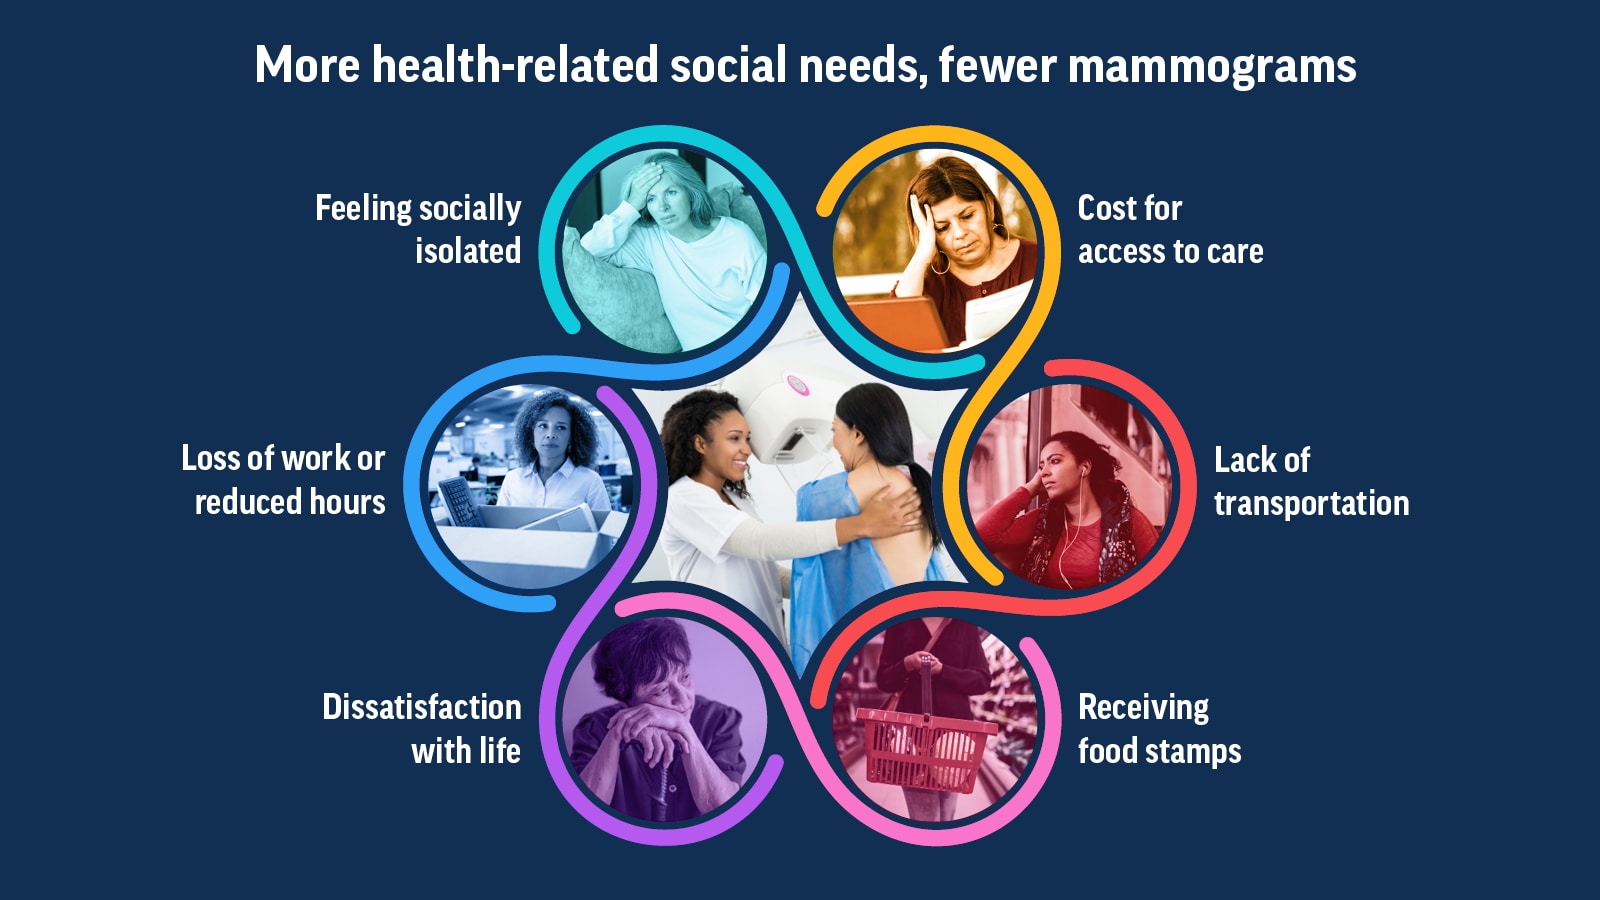 Infographic about more health-related social needs, fewer mammograms